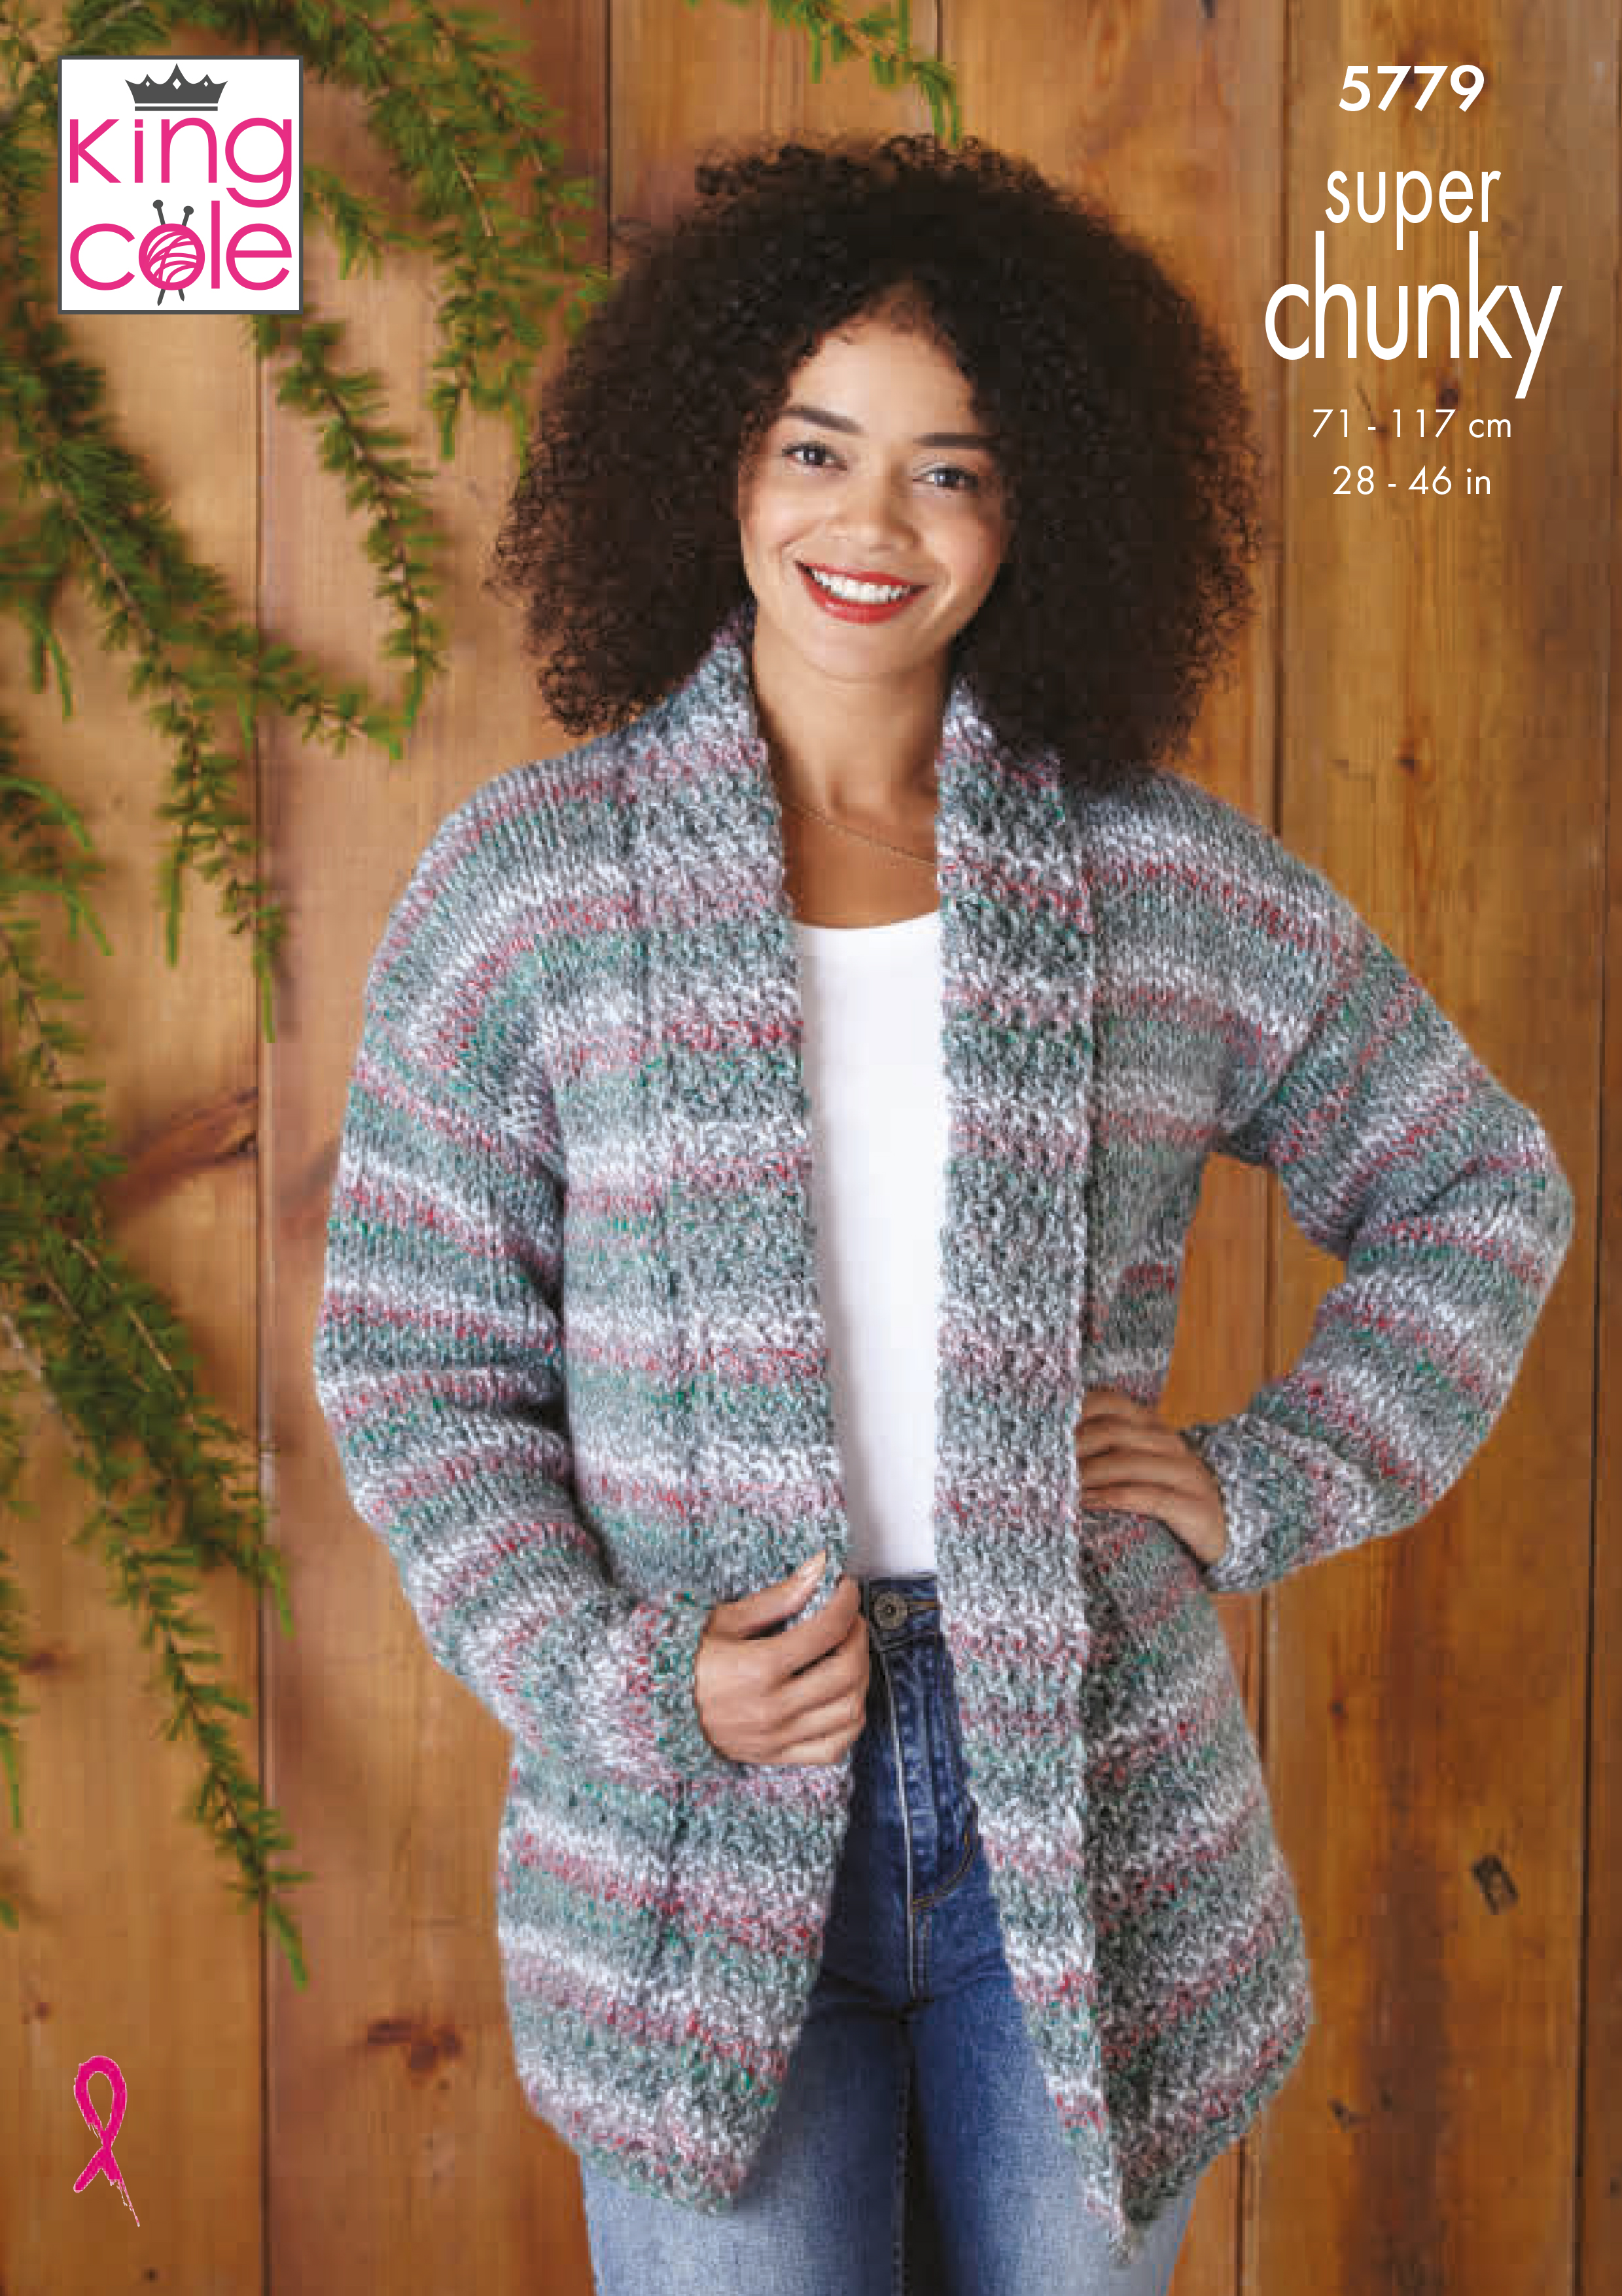 Jacket & Sweater Knitted in Christmas Super Chunky 5779 x3